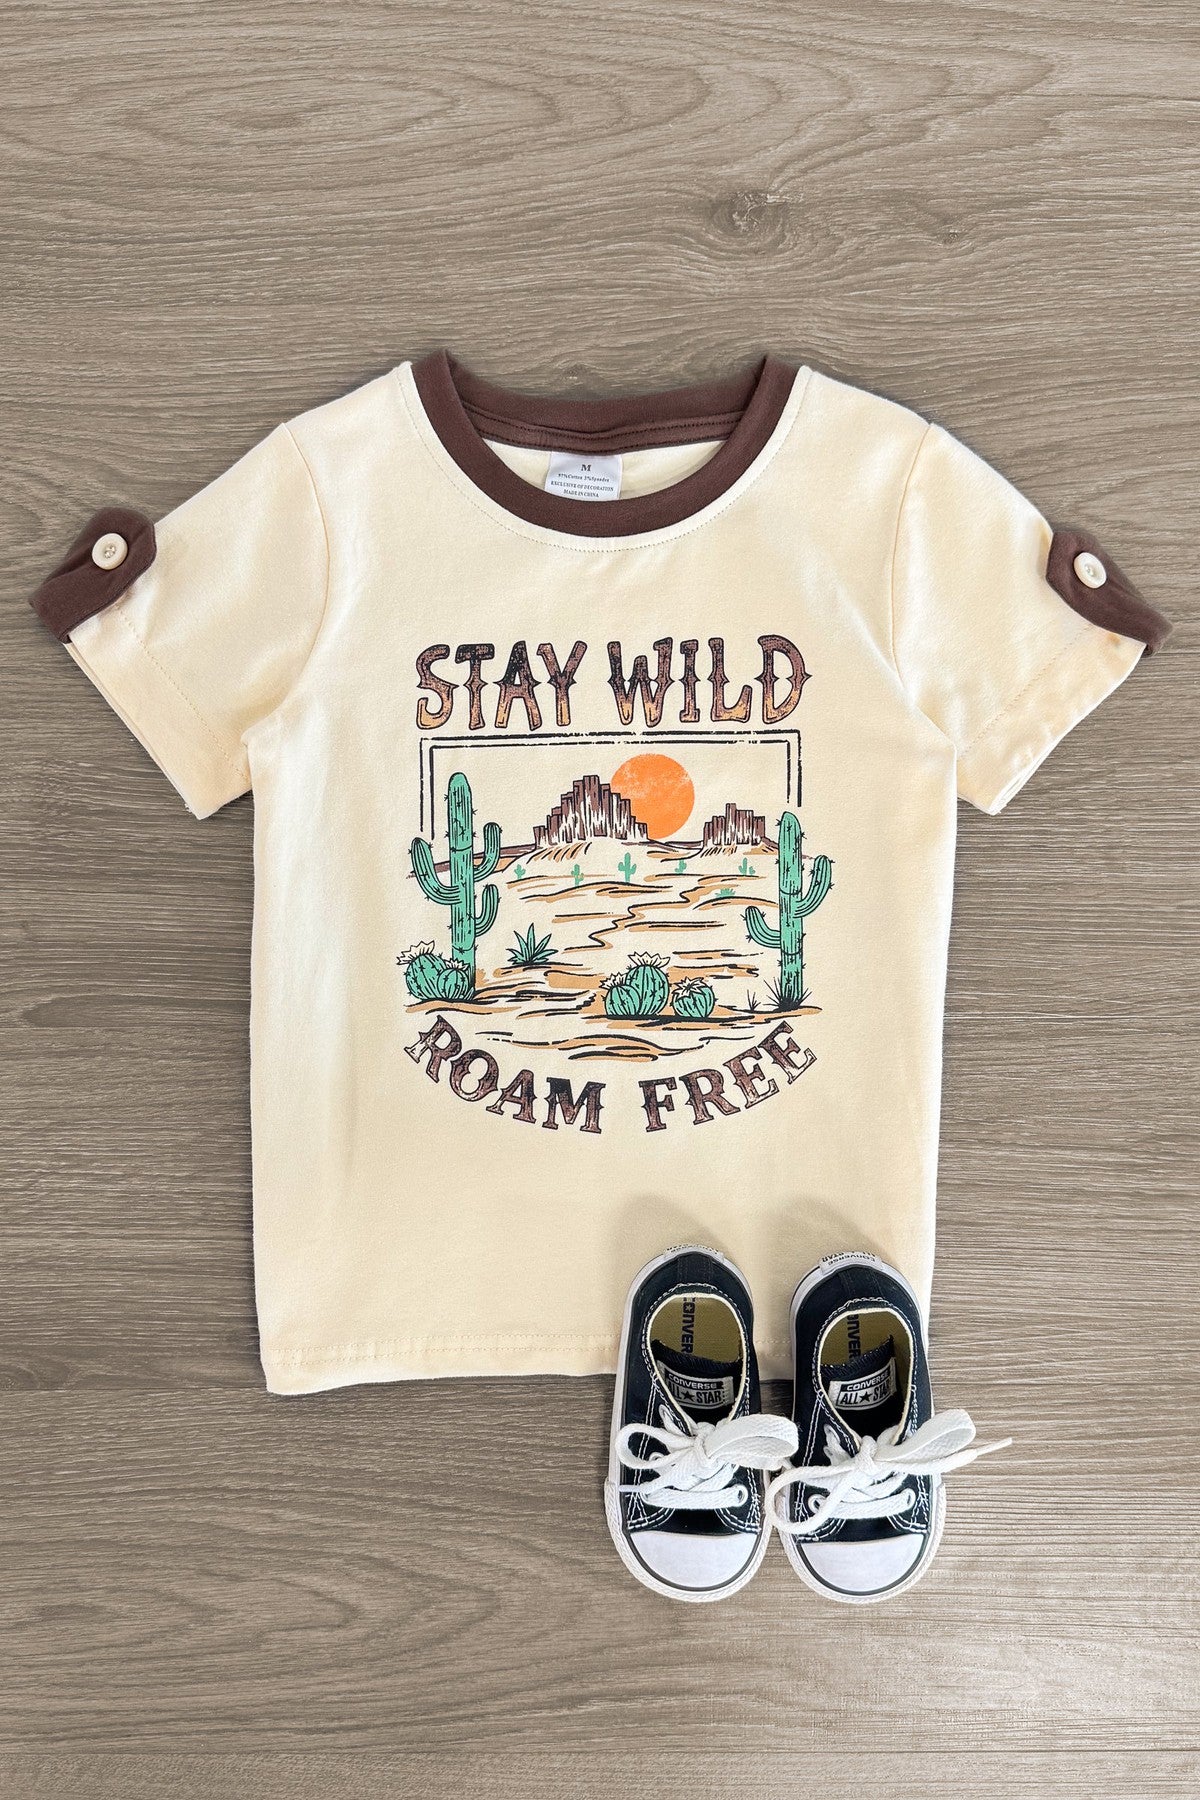 "Stay Wild Roam Free" Tan T-Shirt - Sparkle in Pink